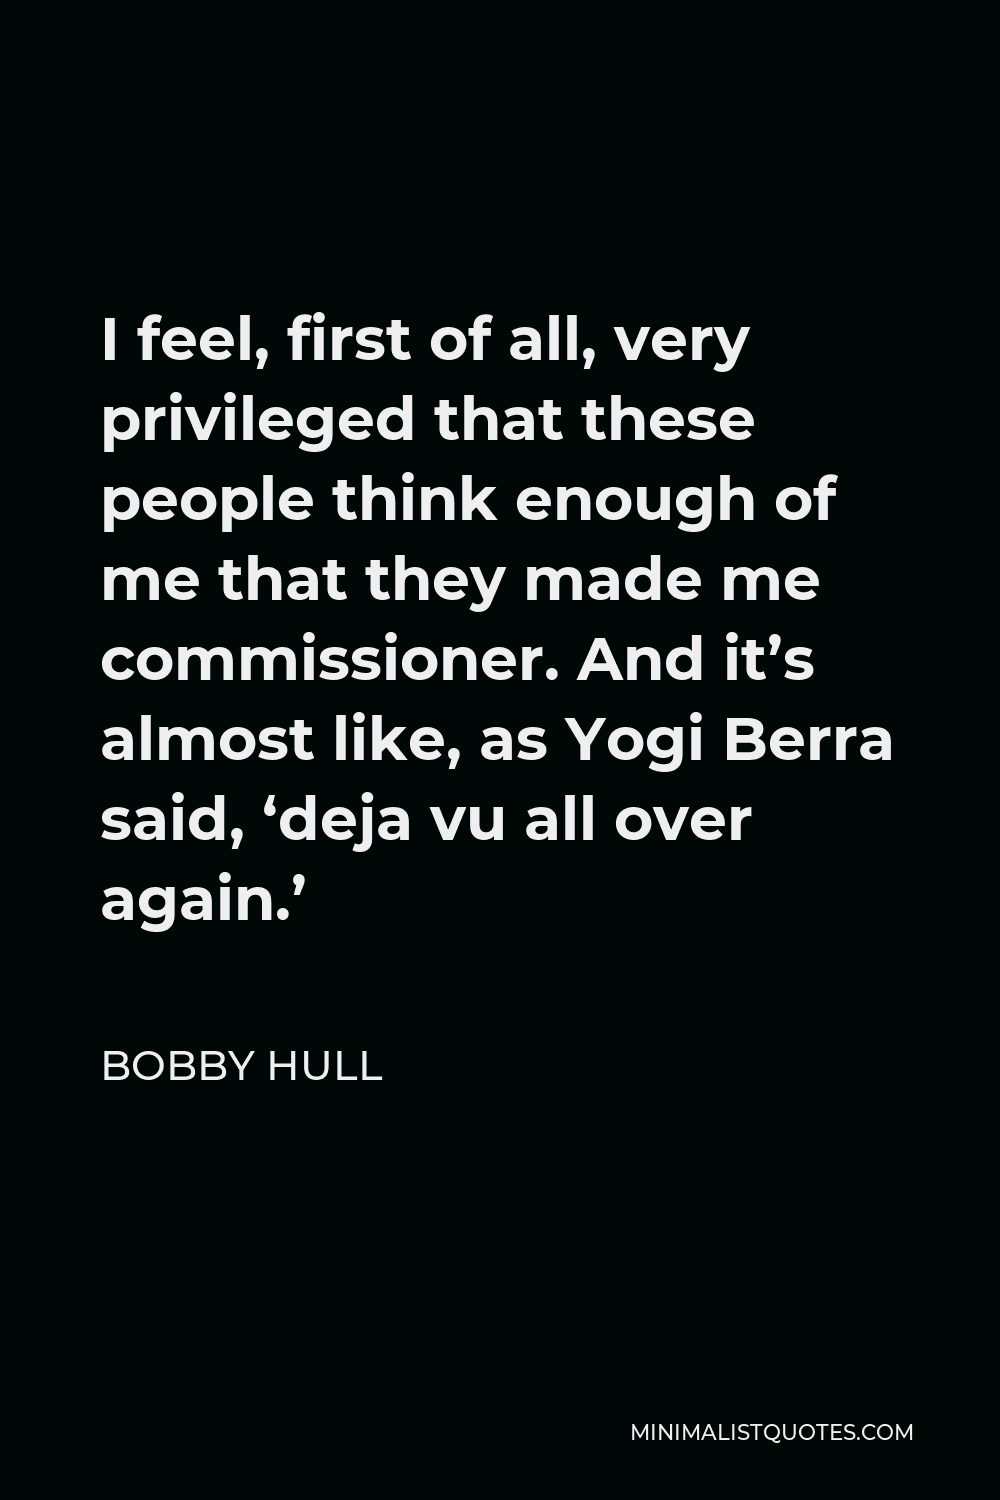 Bobby Hull Quote - I feel, first of all, very privileged that these people think enough of me that they made me commissioner. And it’s almost like, as Yogi Berra said, ‘deja vu all over again.’